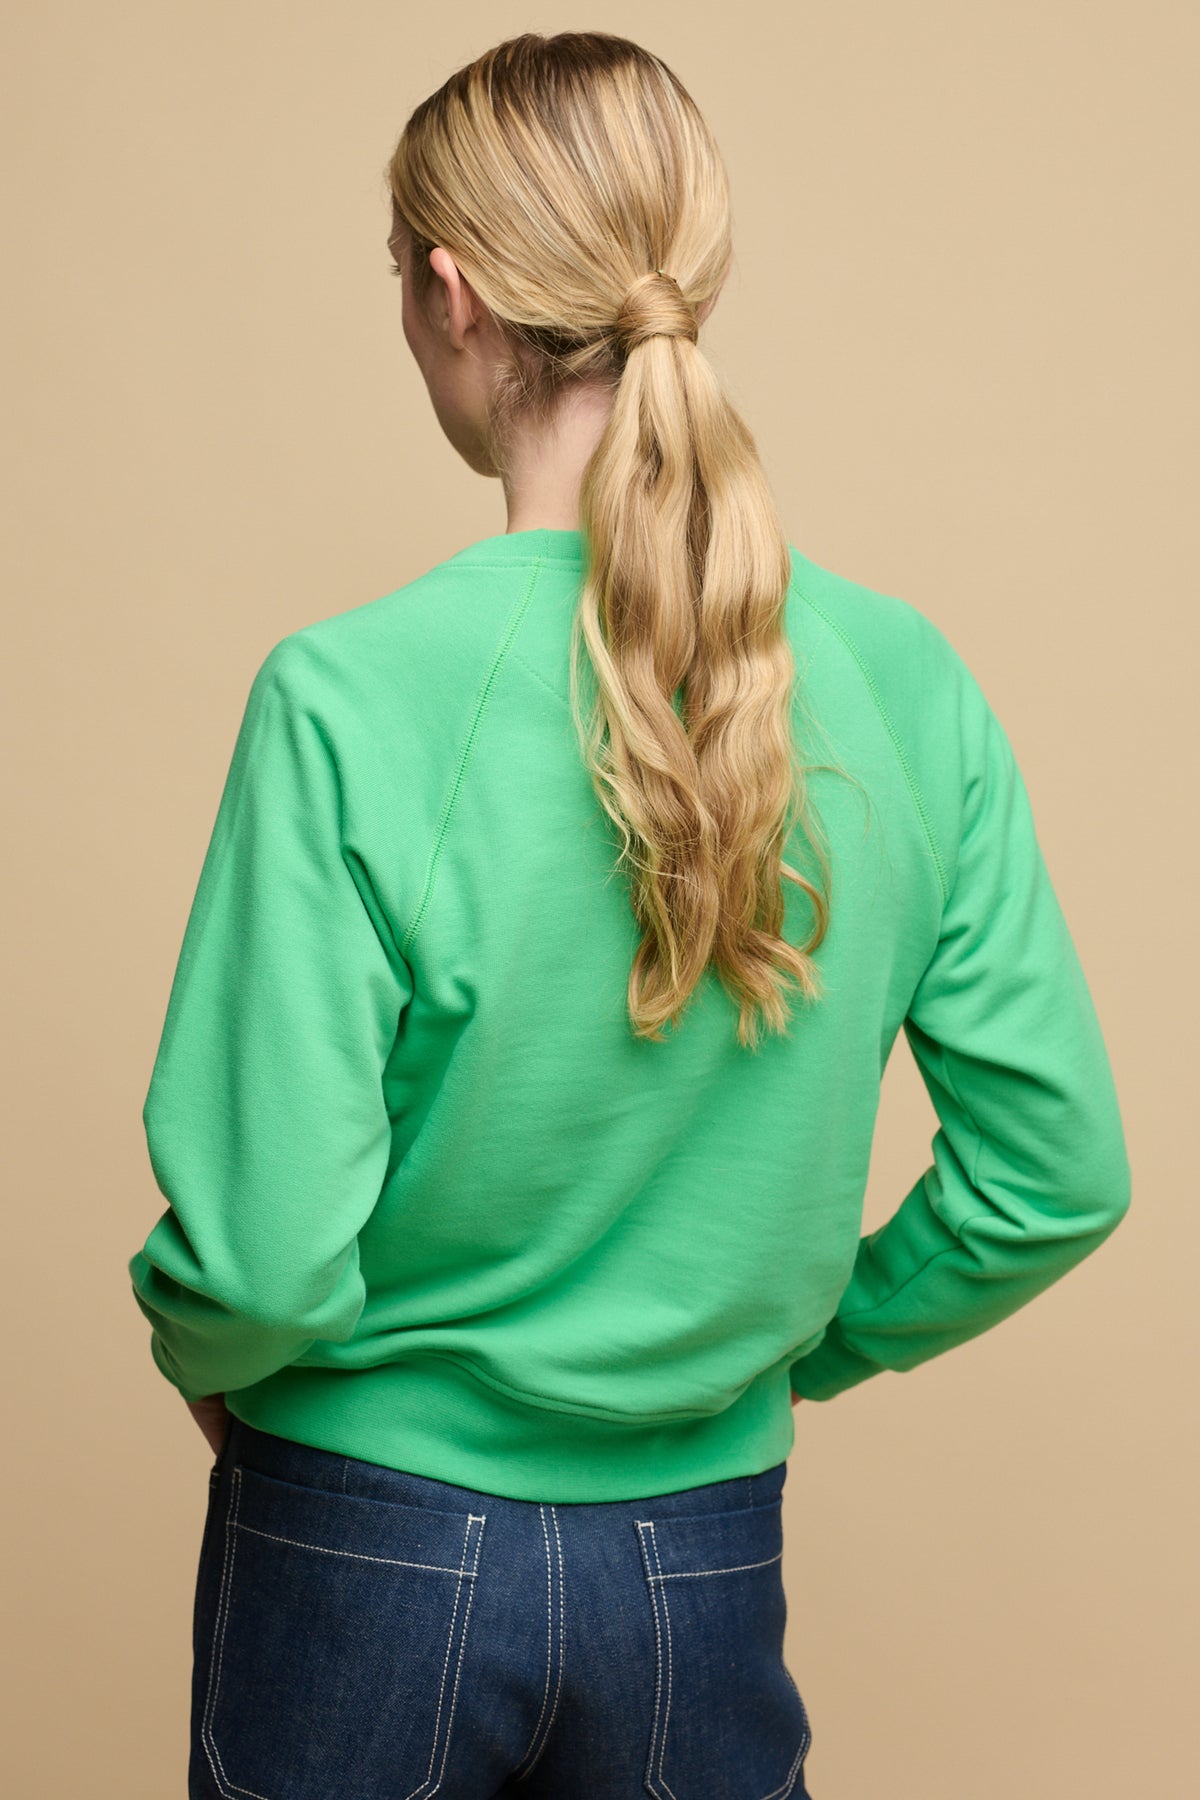 
            The back of female with long blonde hair tied back into low ponytail wearing raglan sweatshirt in apple green